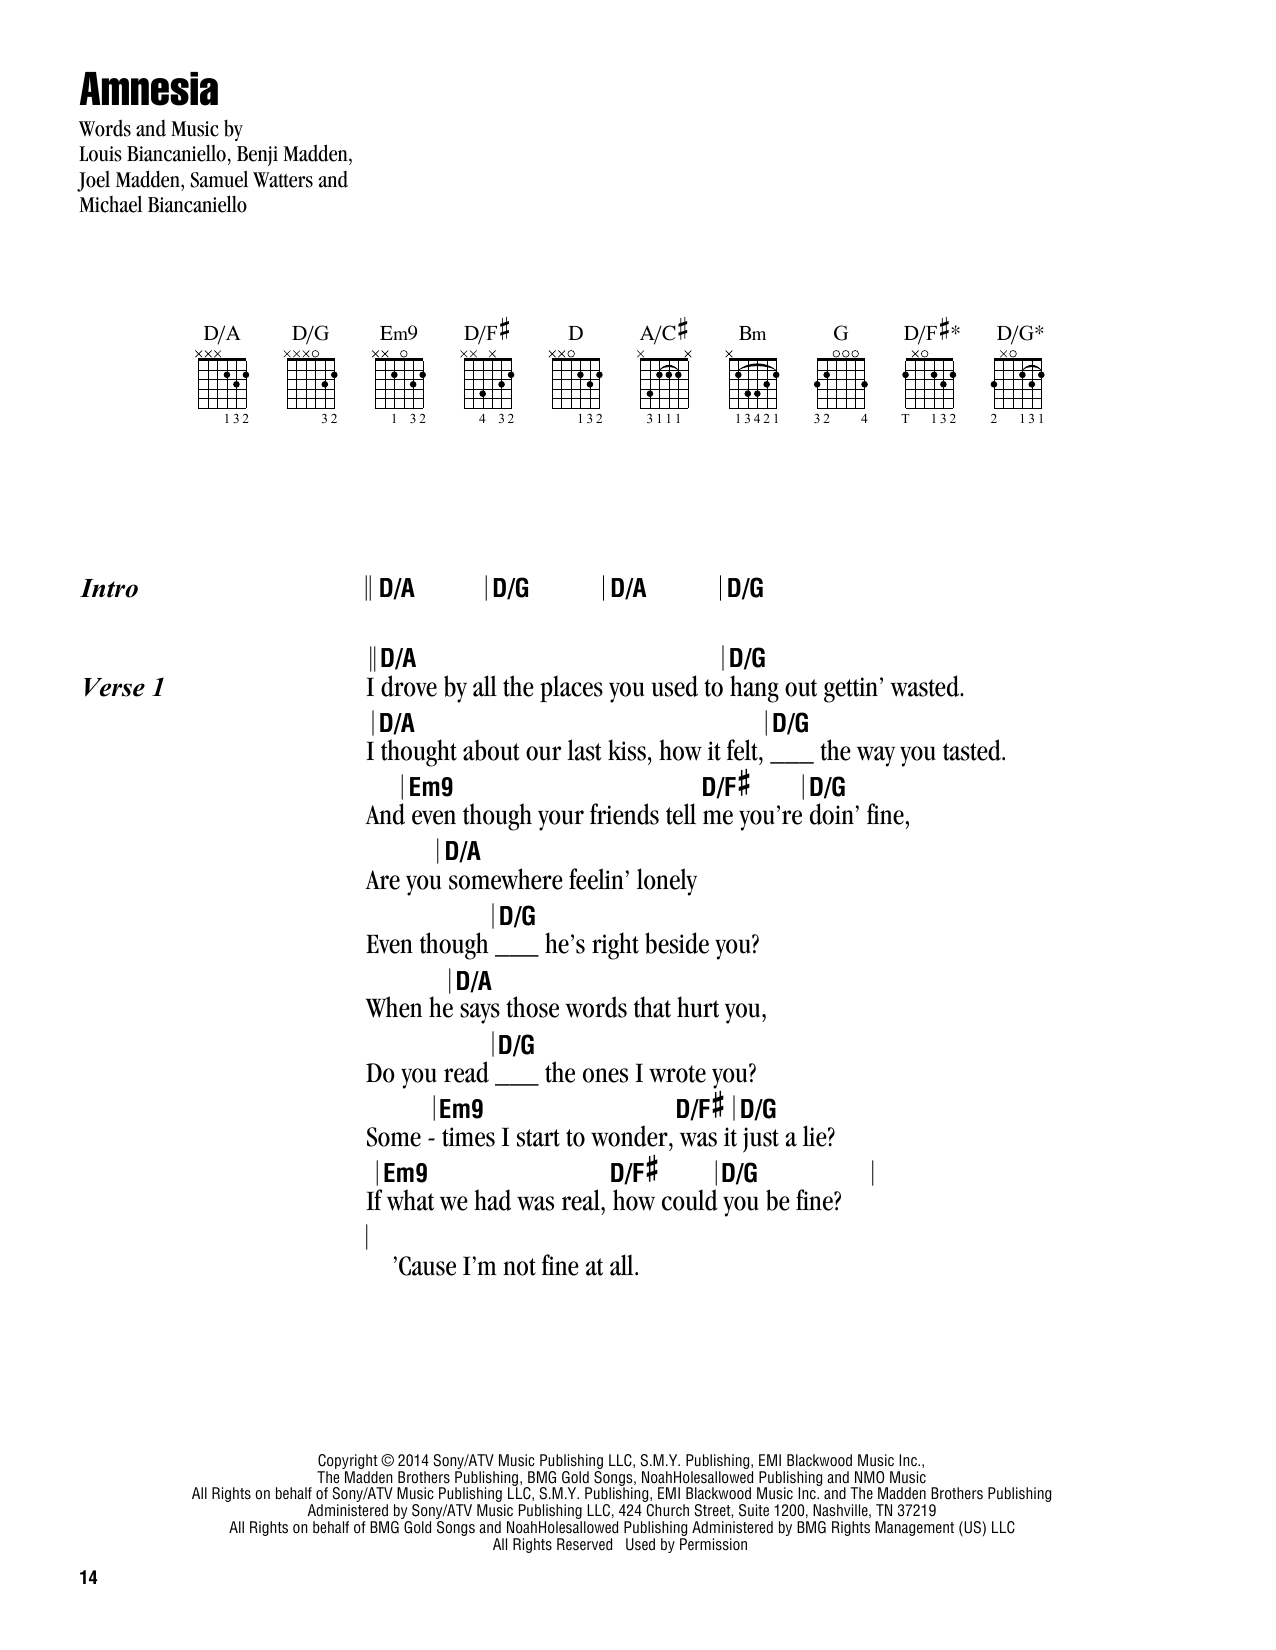 Download 5 Seconds of Summer Amnesia Sheet Music